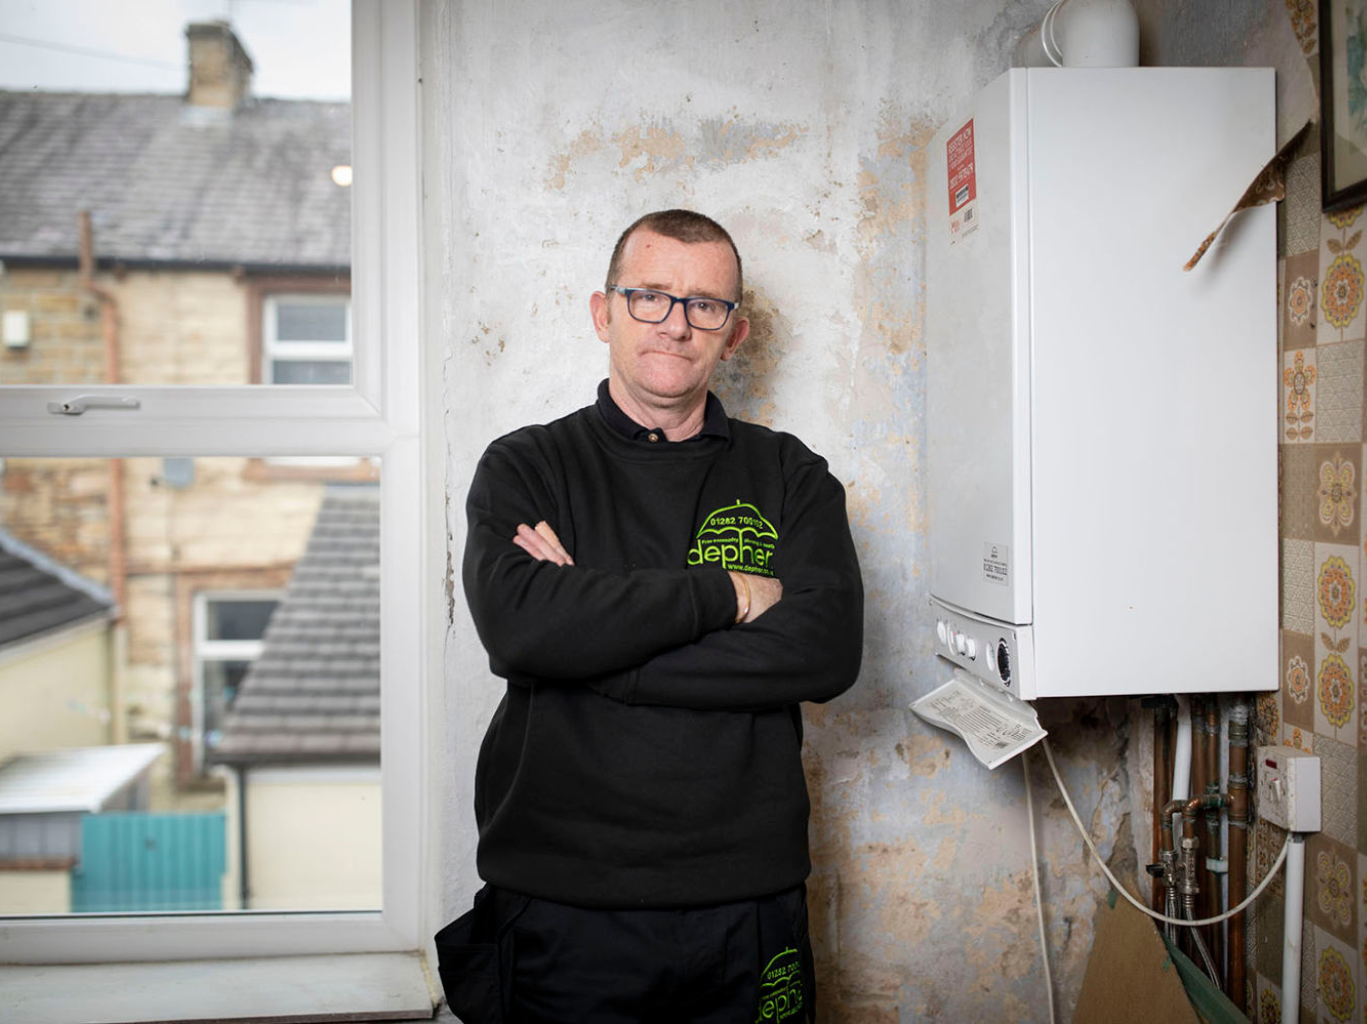 Fighting fuel poverty in the North West - Depher, our charity partner